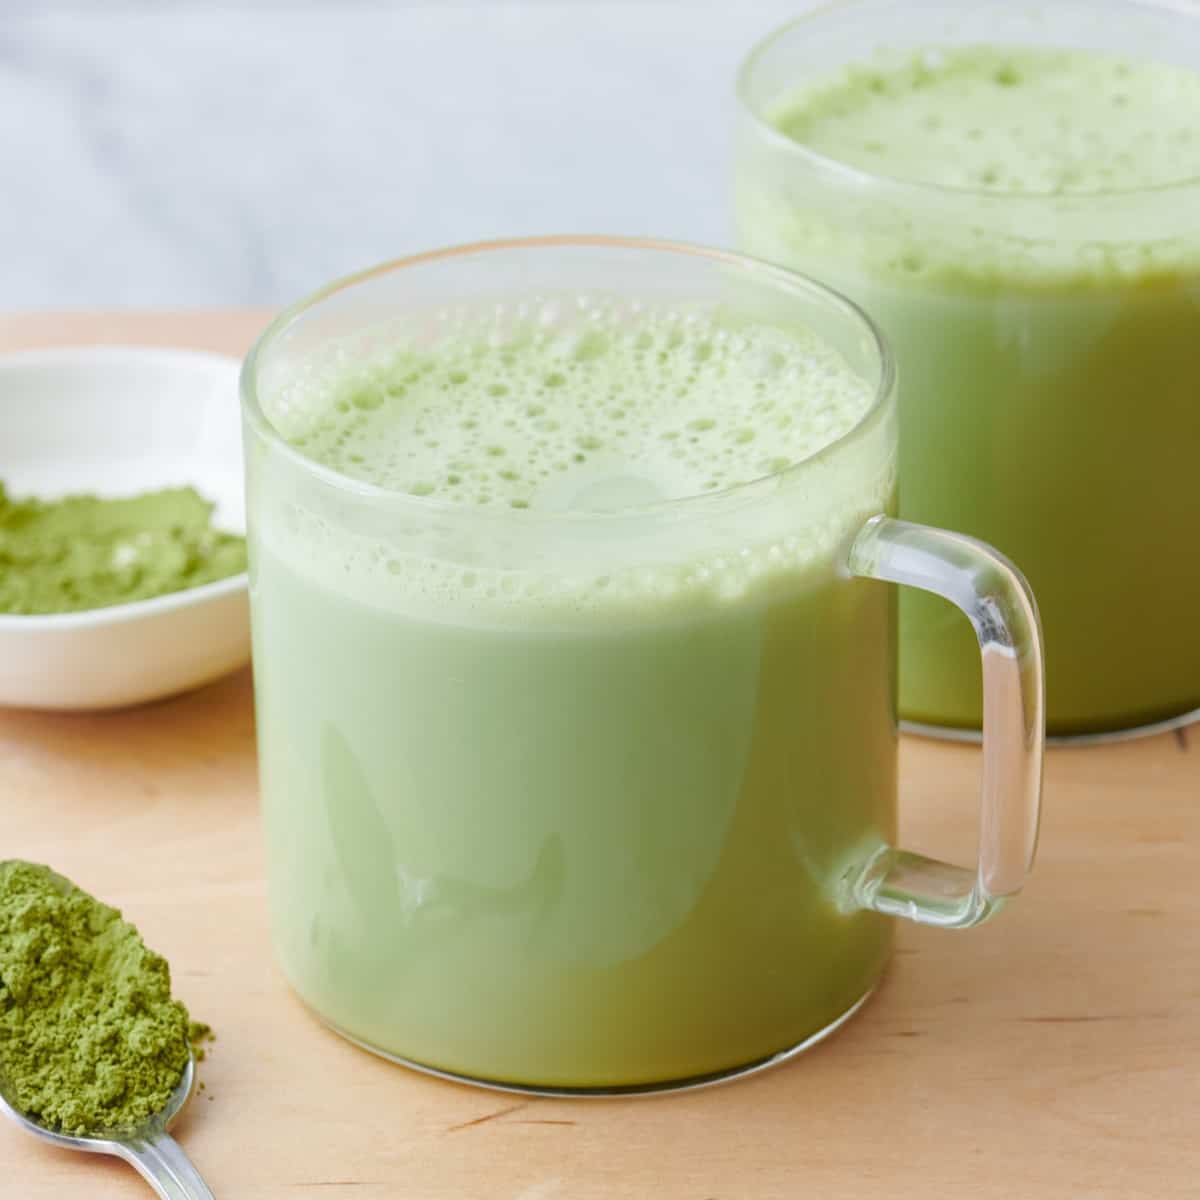 Matcha latte in a glass mug with matcha powder on a spoon and small dish.